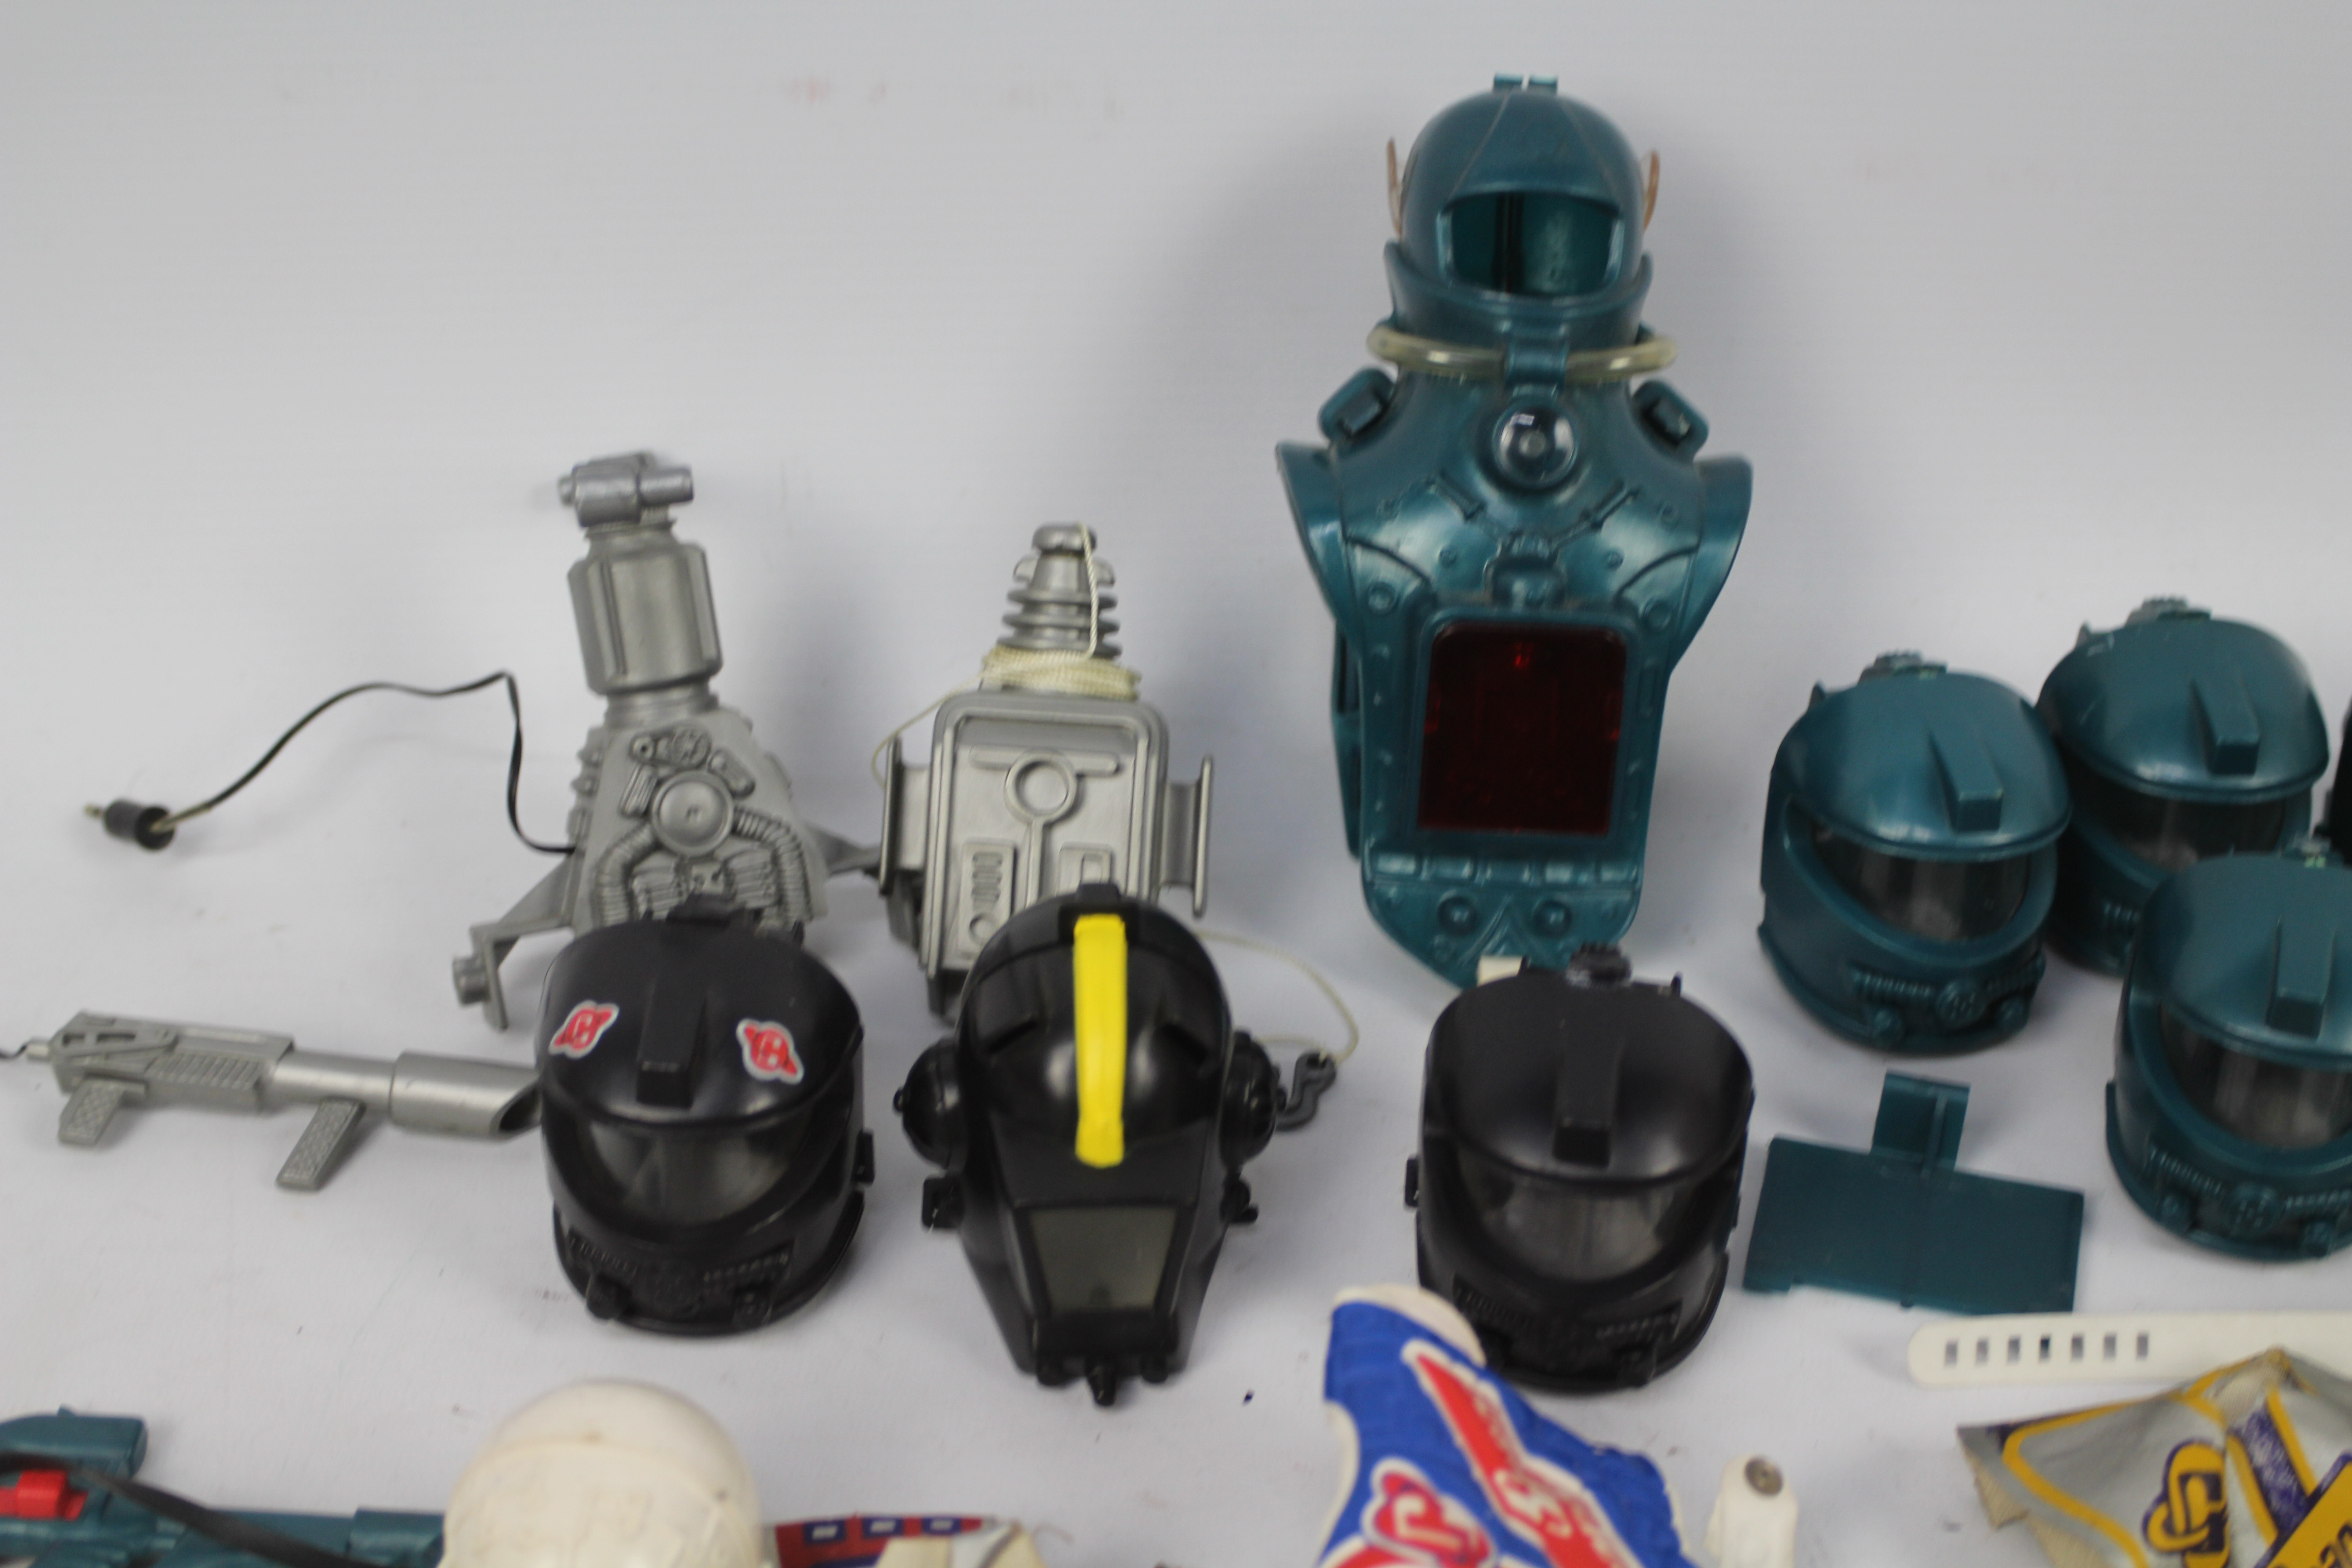 Palitoy - Hasbro - Action Man - A collection of loose Palitoy Action Man 'Space Ranger' accessories - Image 3 of 5